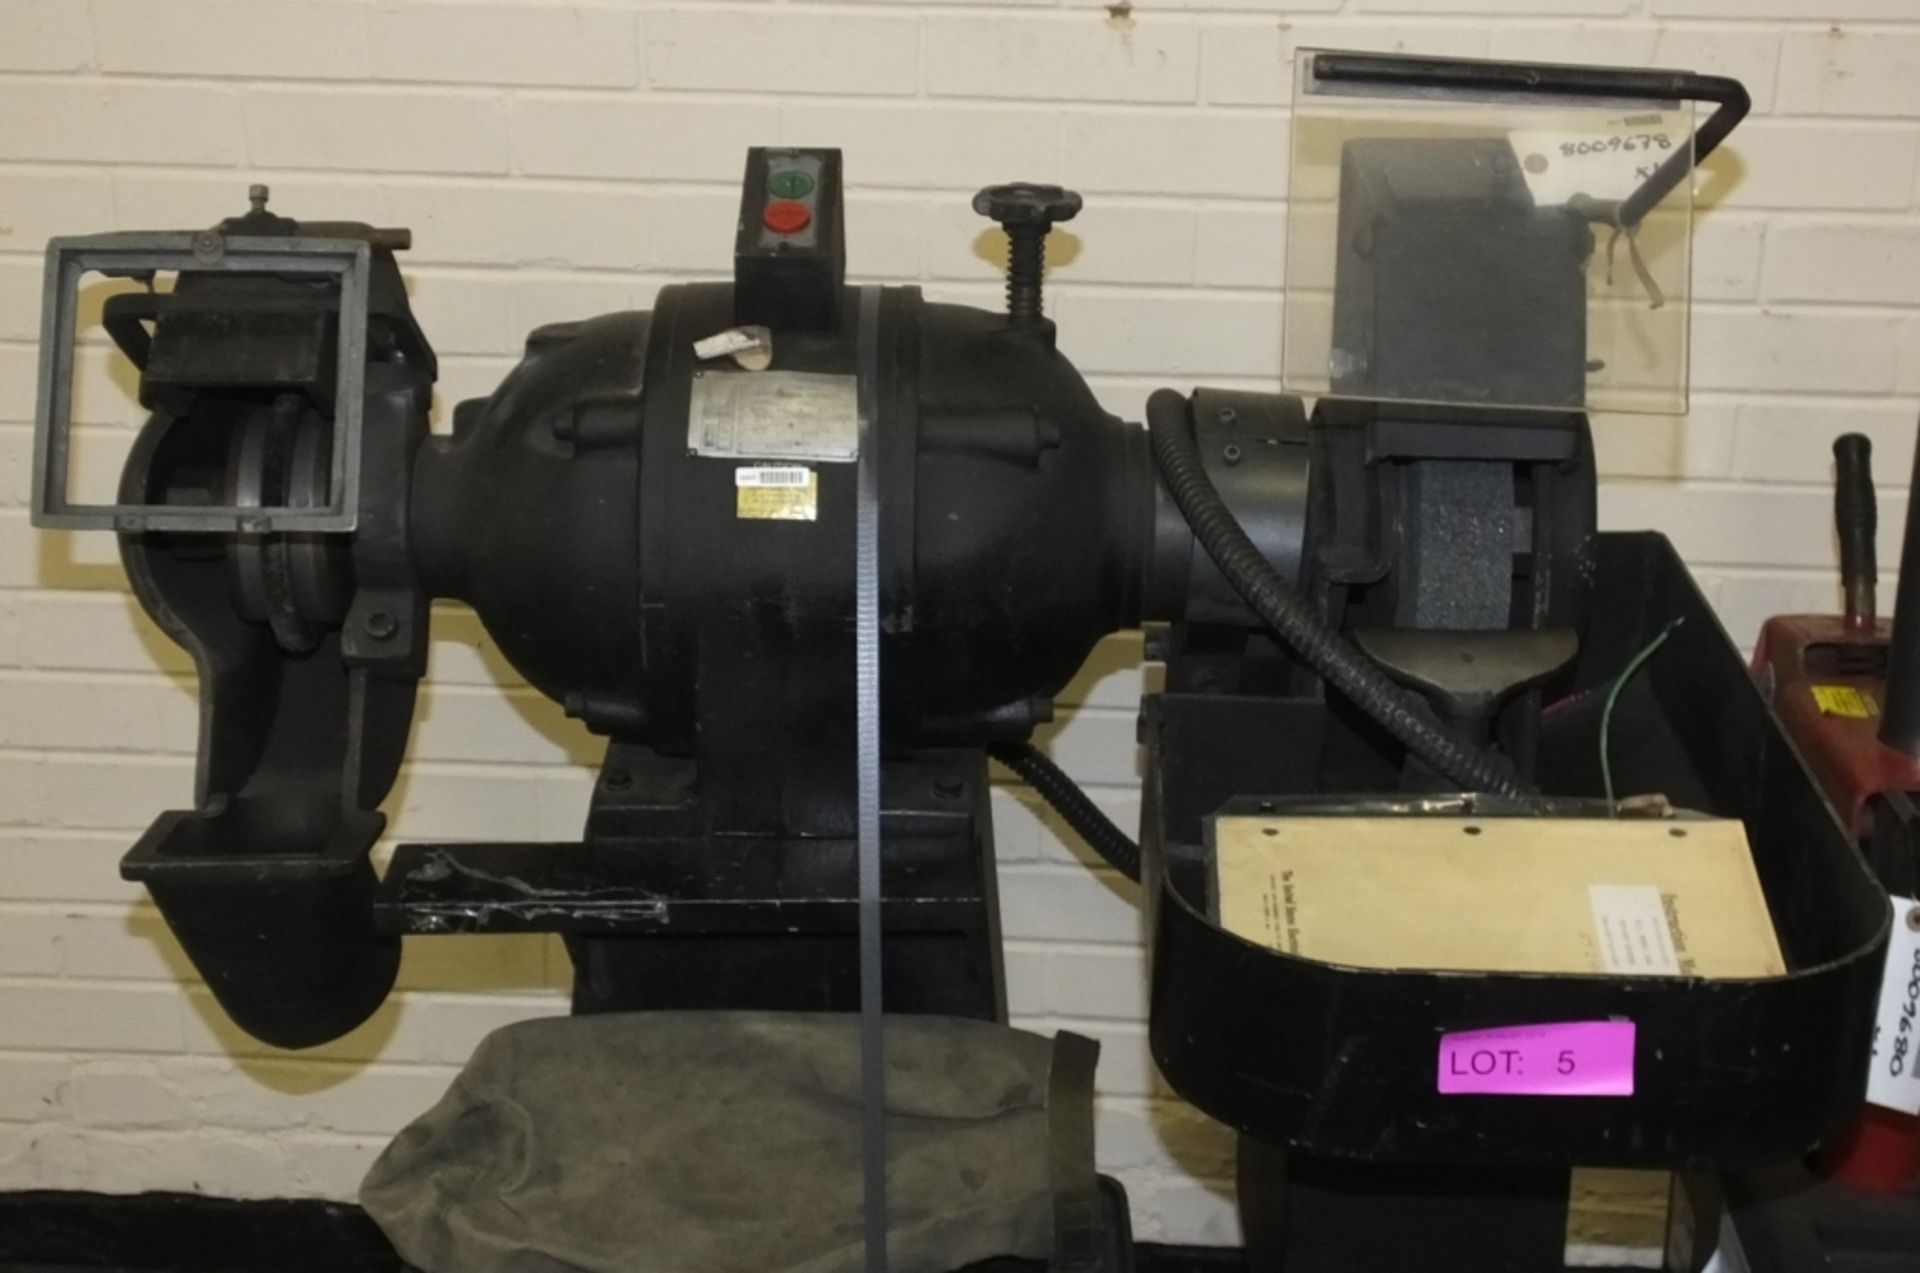 U.S.E 10WG Wet-Dry Grinding Machine 220V - £5+VAT lift out charge applied to this lot - Image 2 of 3